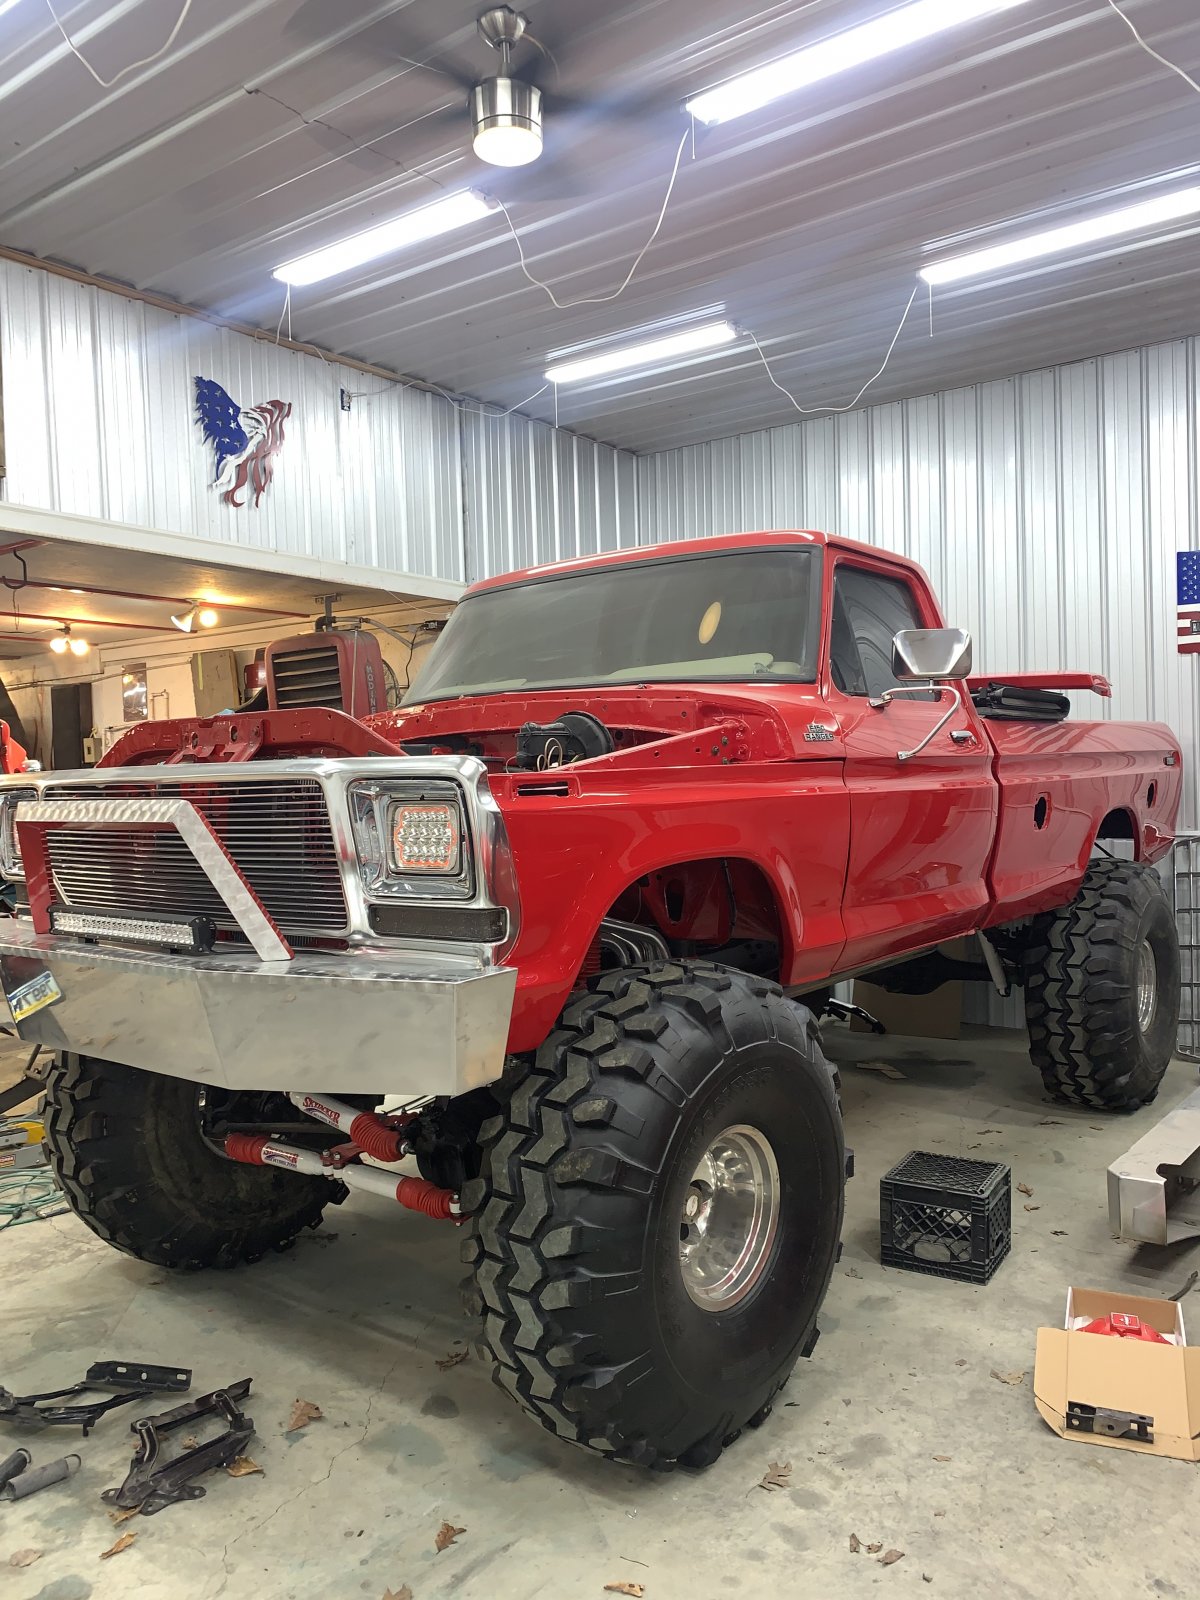 1978 Ford F150 With a 575 HP Built From Scratch 15.jpg